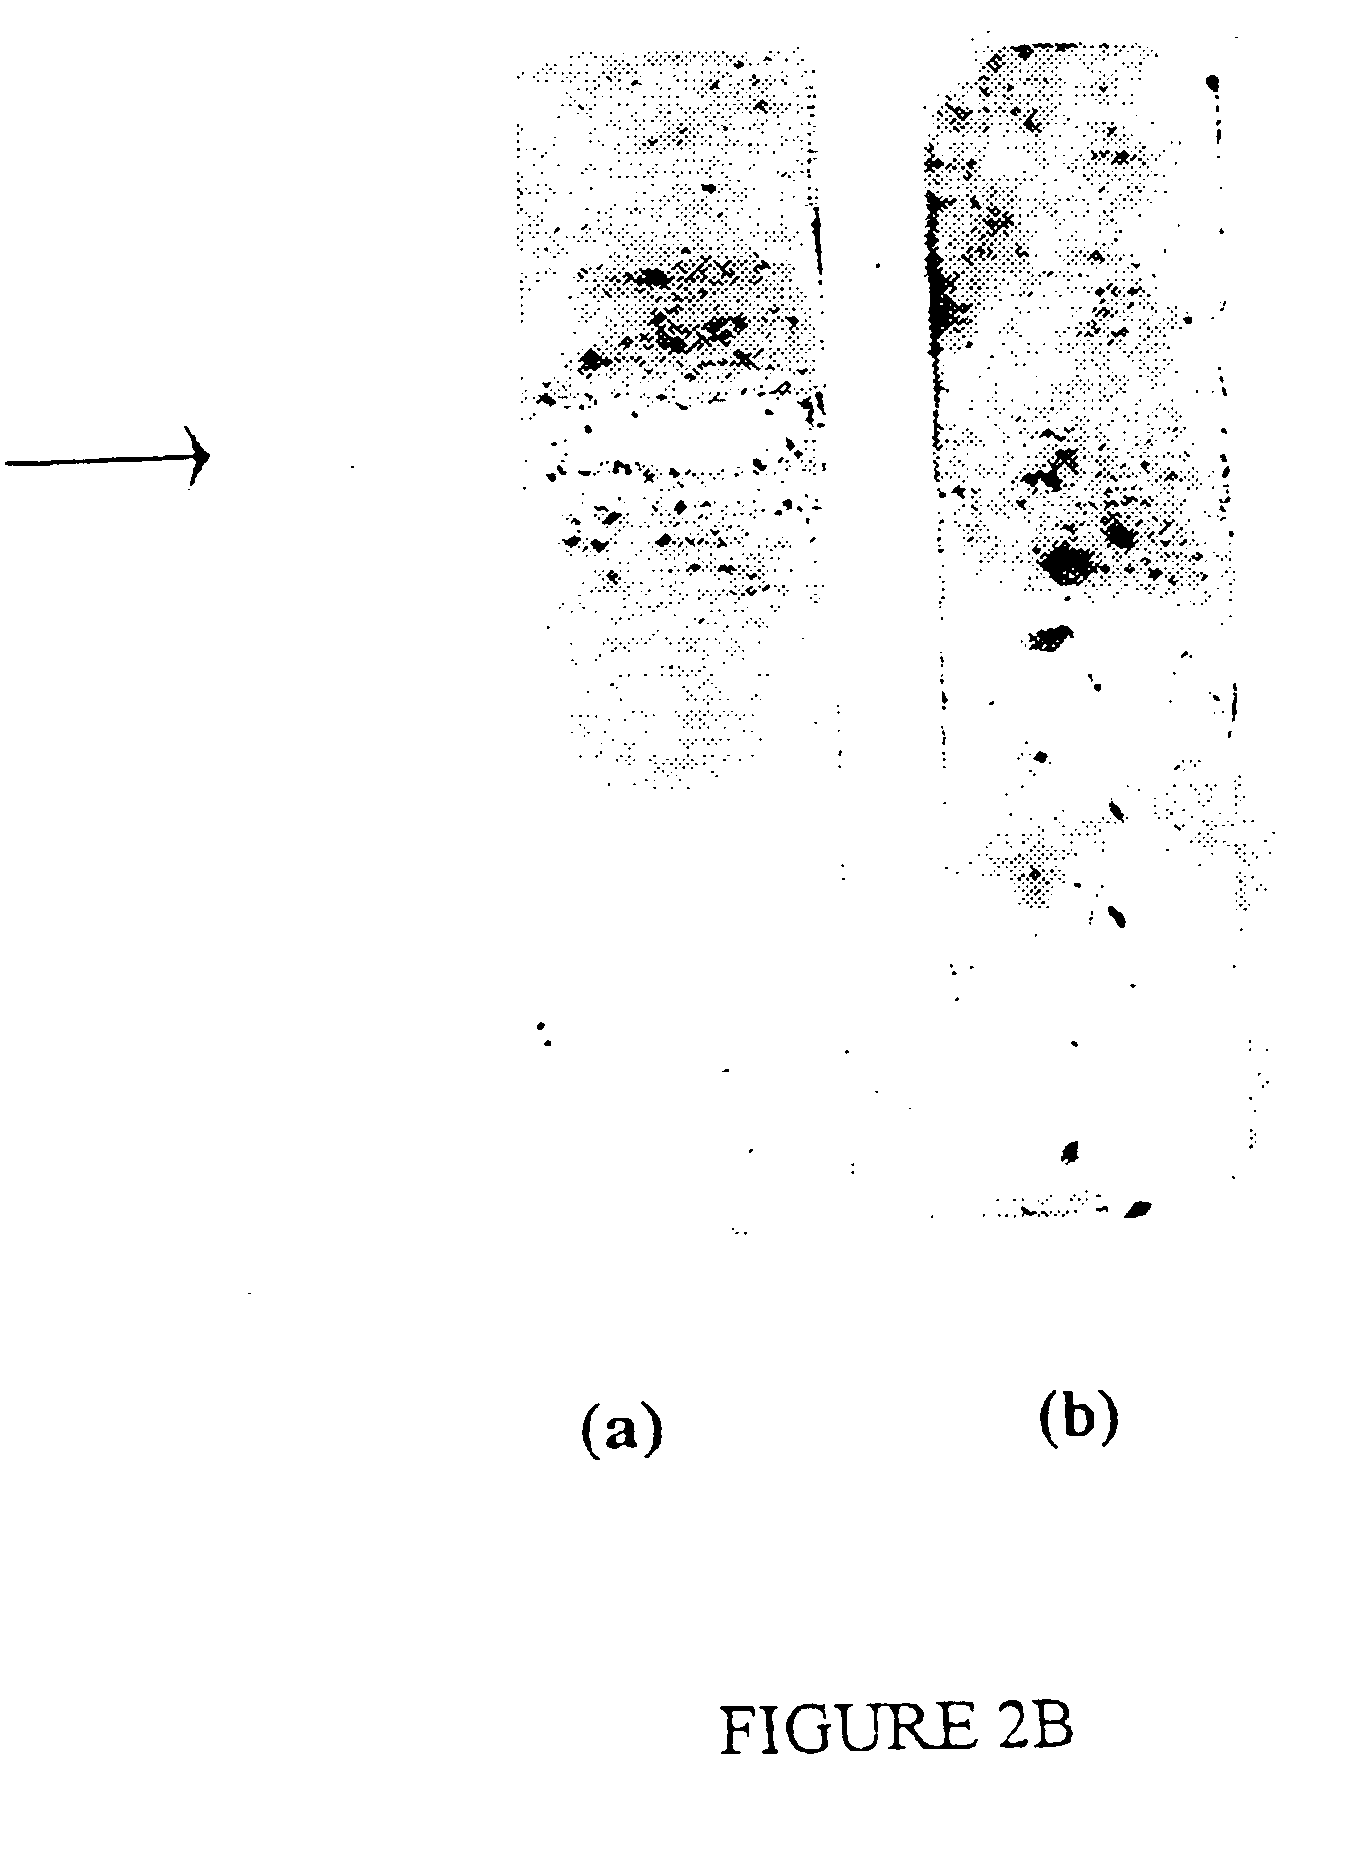 Method of controlling fungal pathogens, and agents useful for same